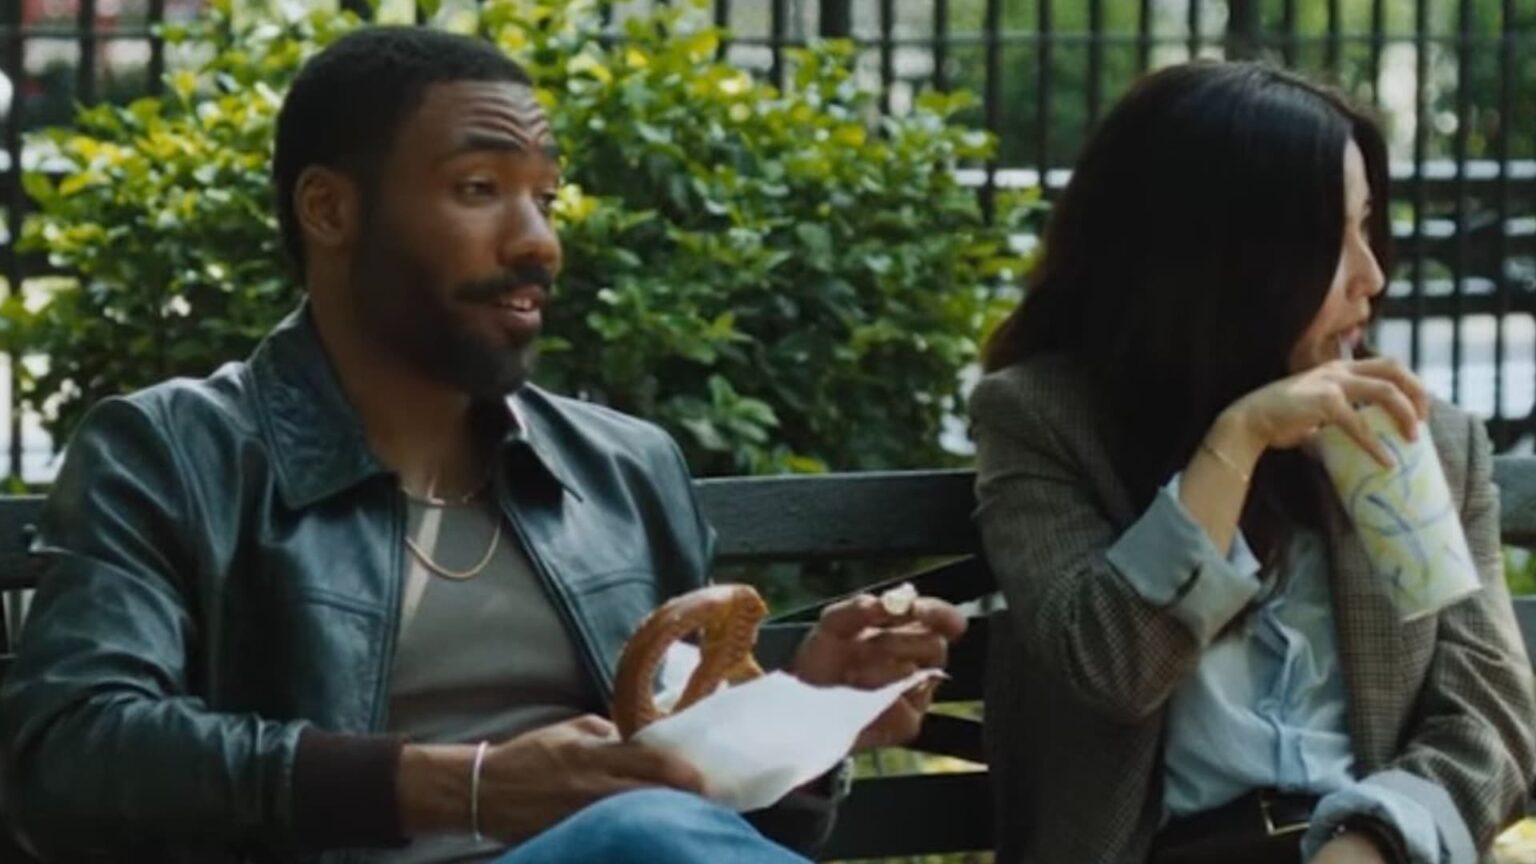 First Look: Amazon's 'Mr & Mrs Smith' Starring Donald Glover